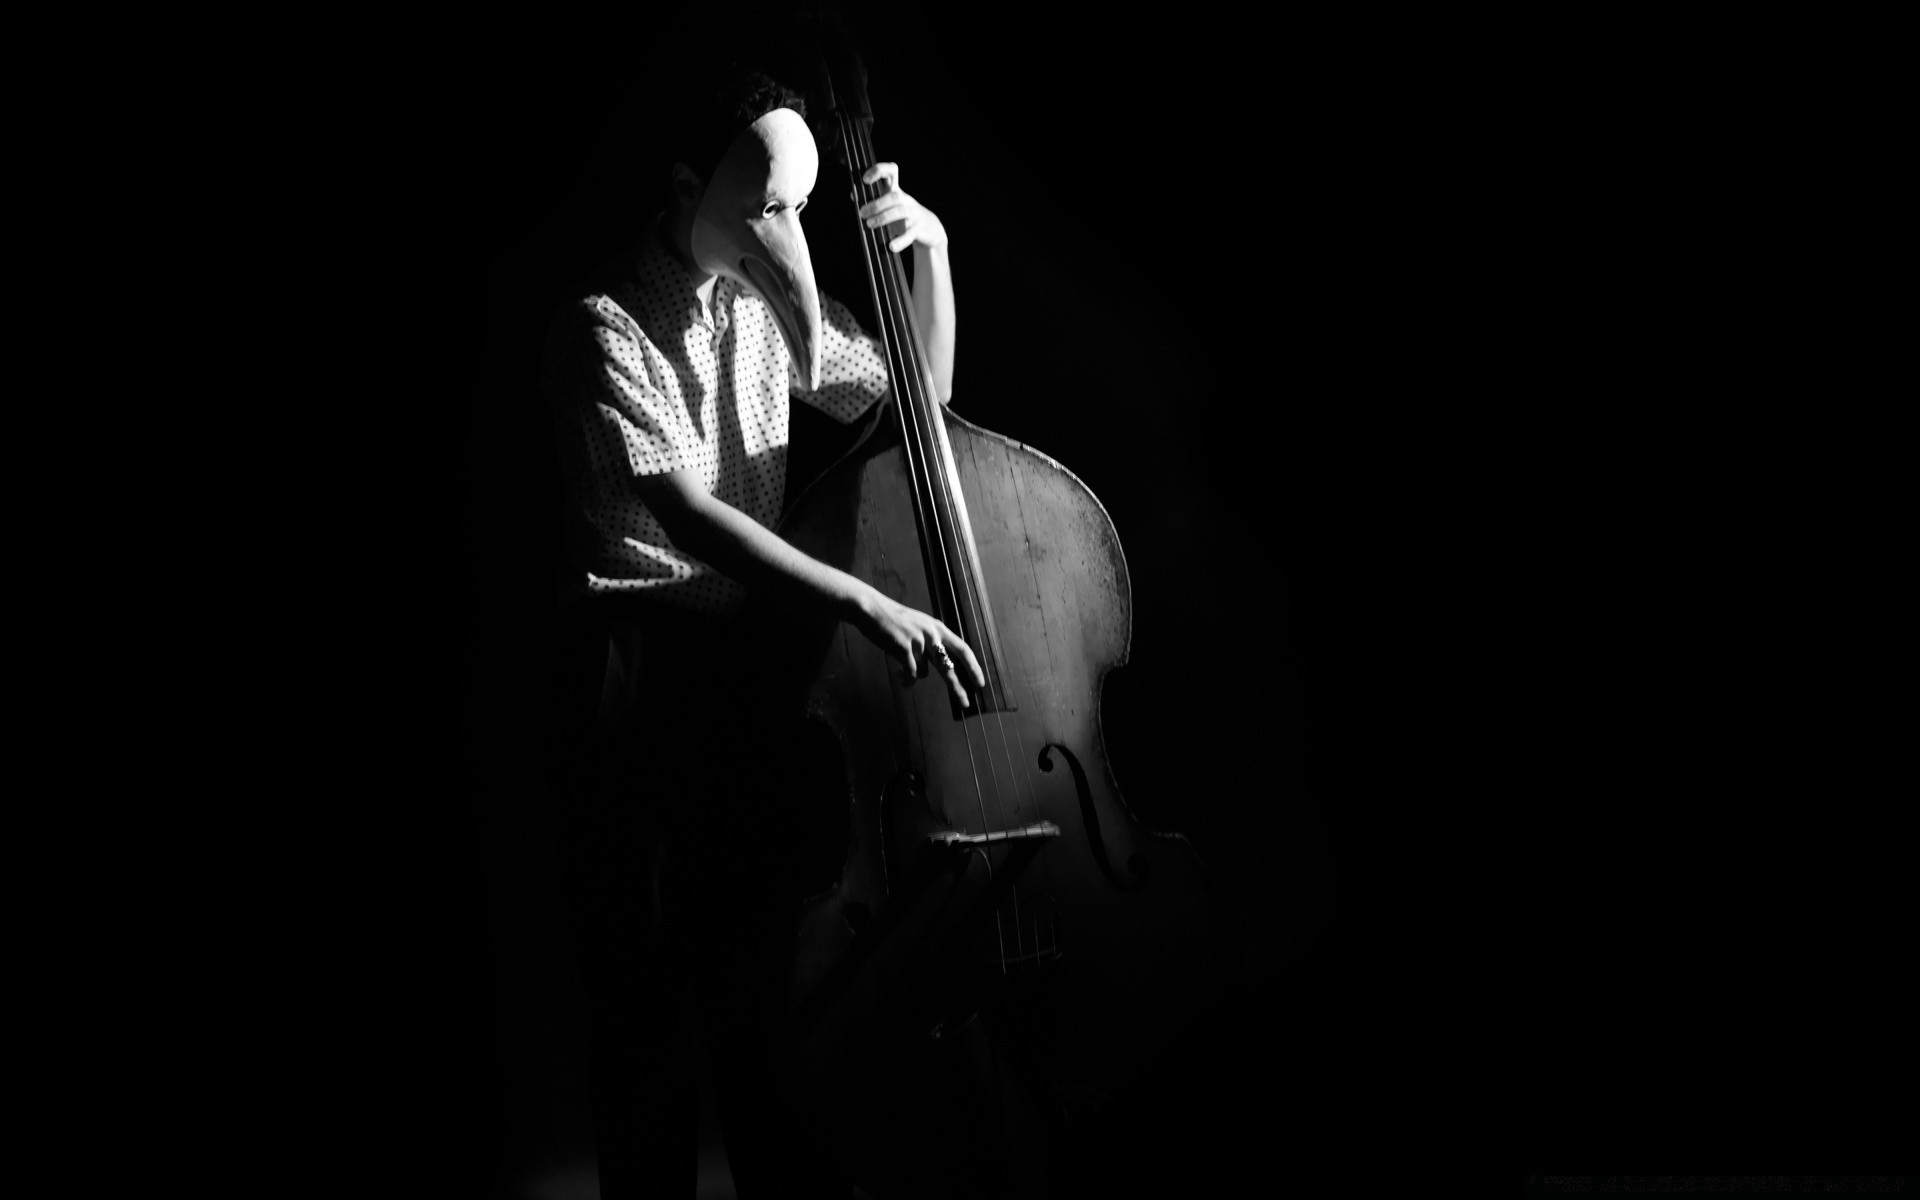 black and white music musician concert performance one instrument woman monochrome singer man adult band dark